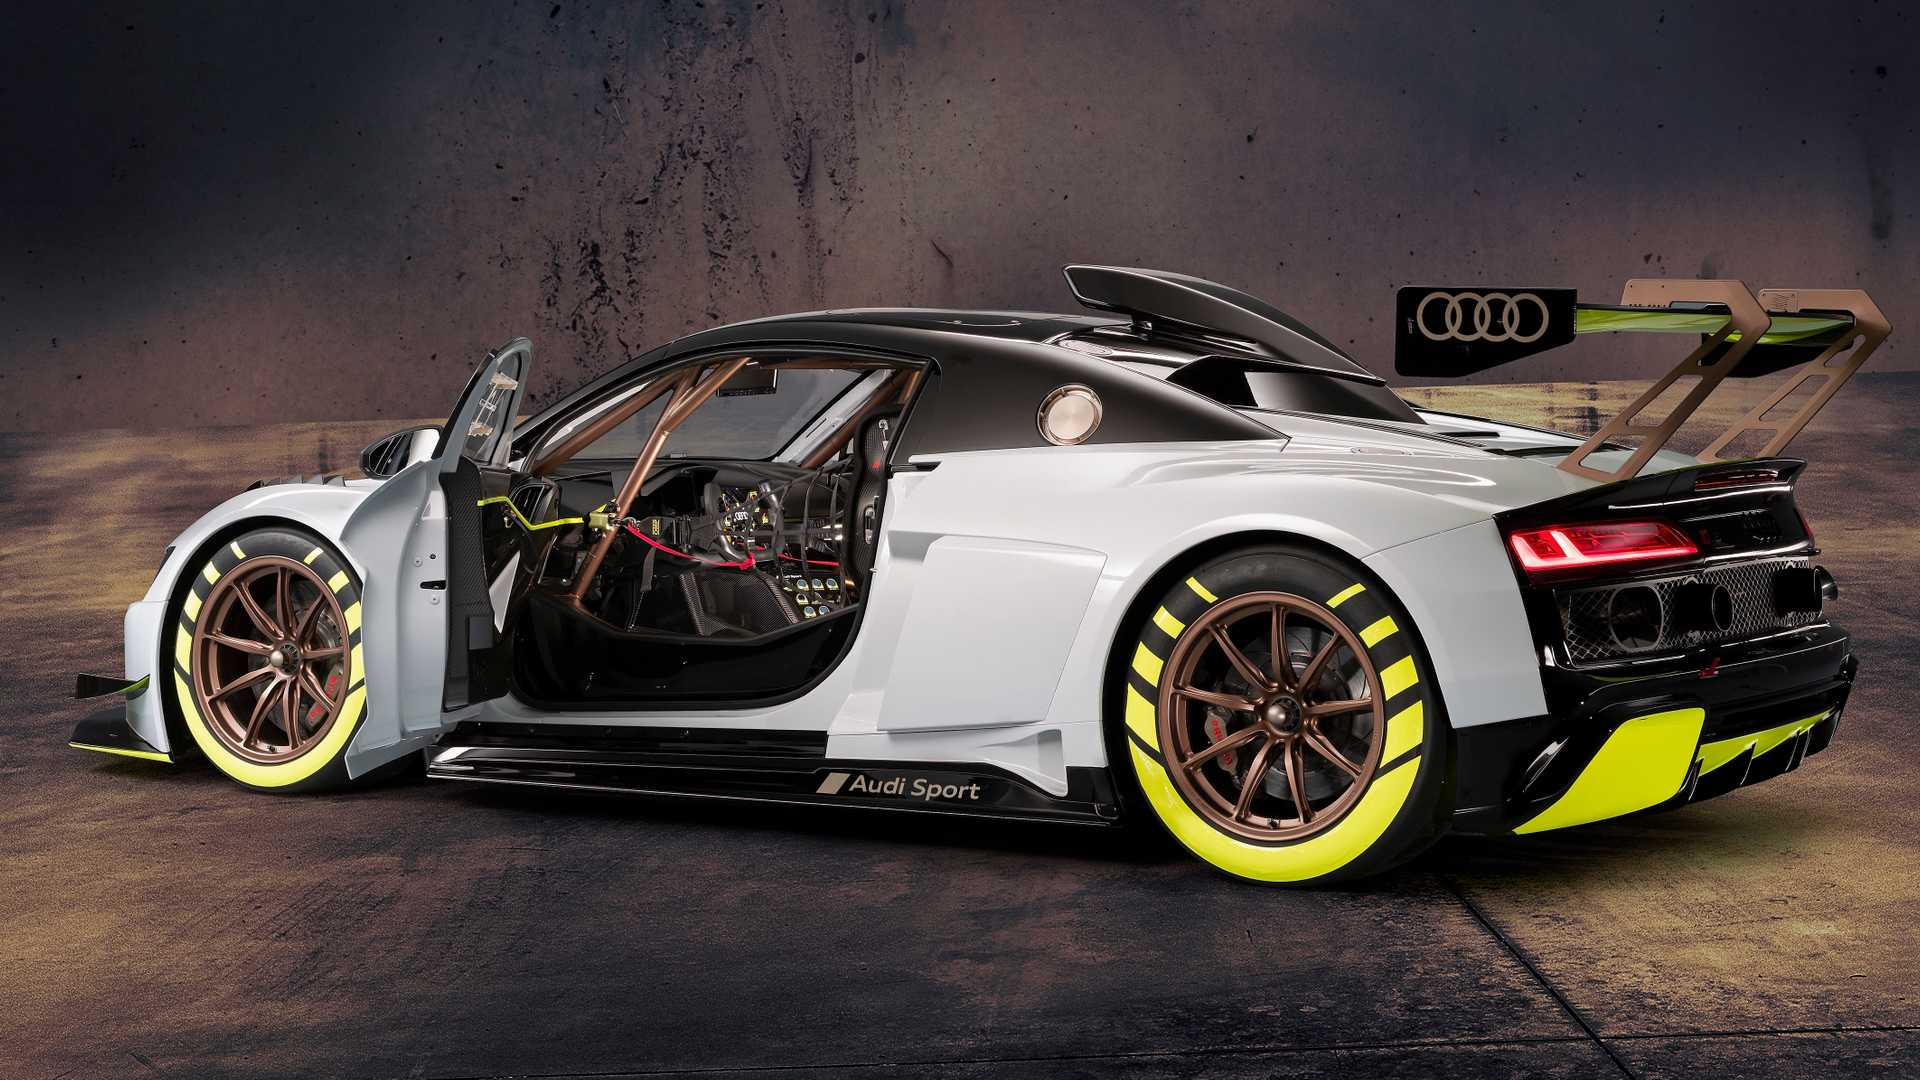 Audi R8 Lms Gt2 Is A Wild Race Car With Hp Update